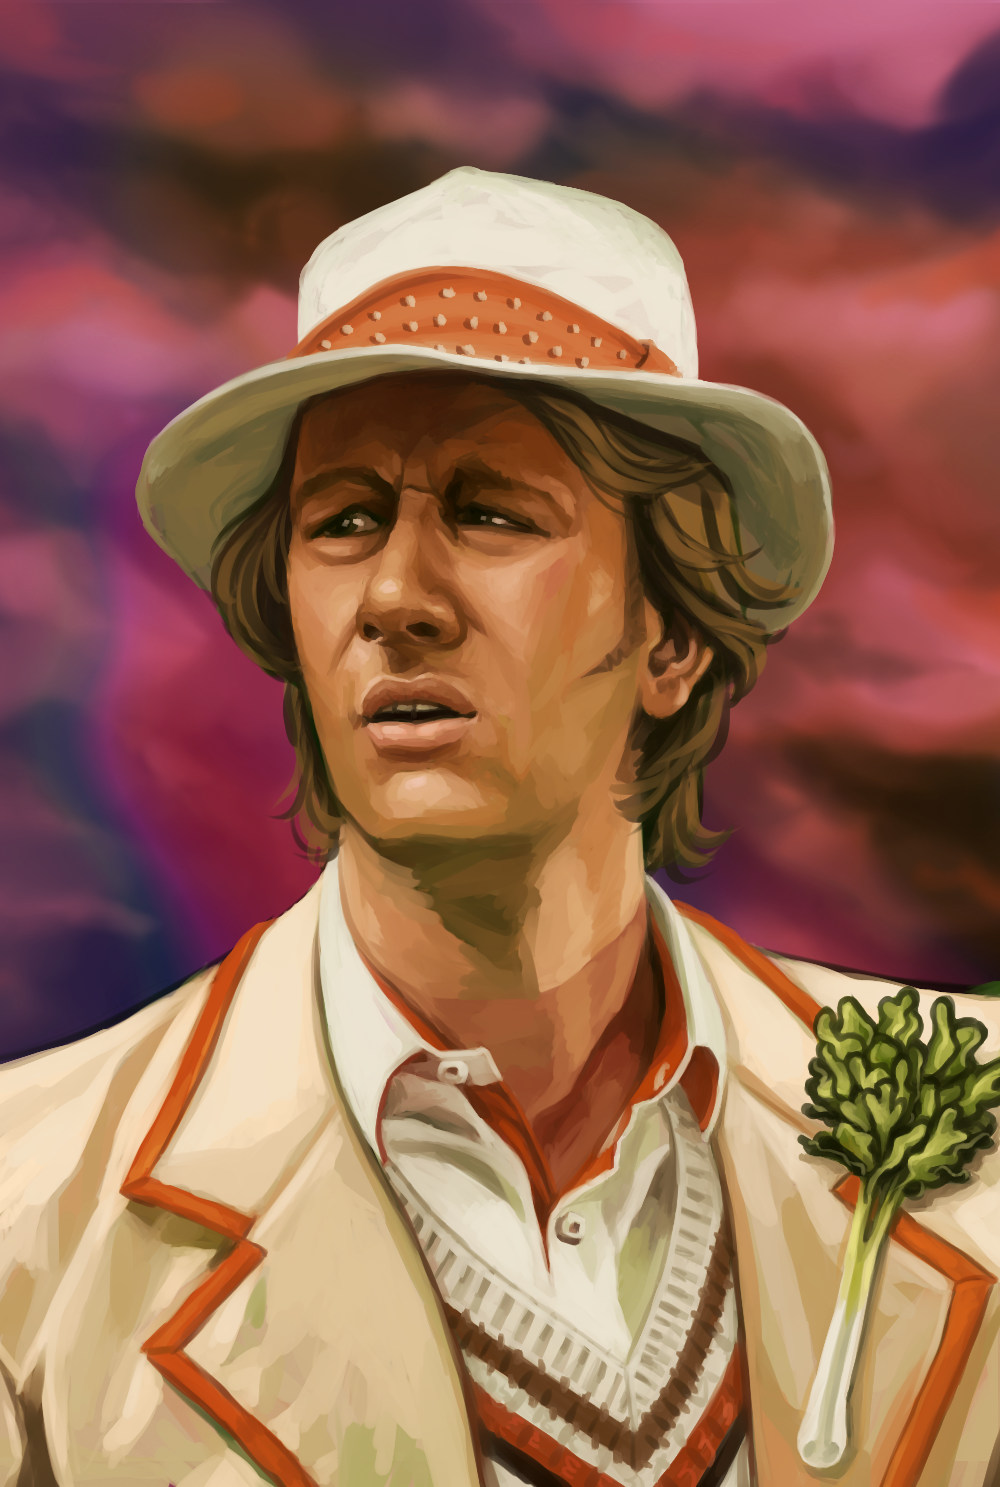 Digital painting of the fifth doctor from Doctor Who. He has shaggy blonde straight hair nearly down to his shoulders, light skin, a bemused expression, and an outfit consisting of a beige frock coat with a sprig of cellery pinned to the lapel, a white collared shirt with a red question mark on the collar, and a cricketing sweater underneath. The background is some kind of pink cloudy sky